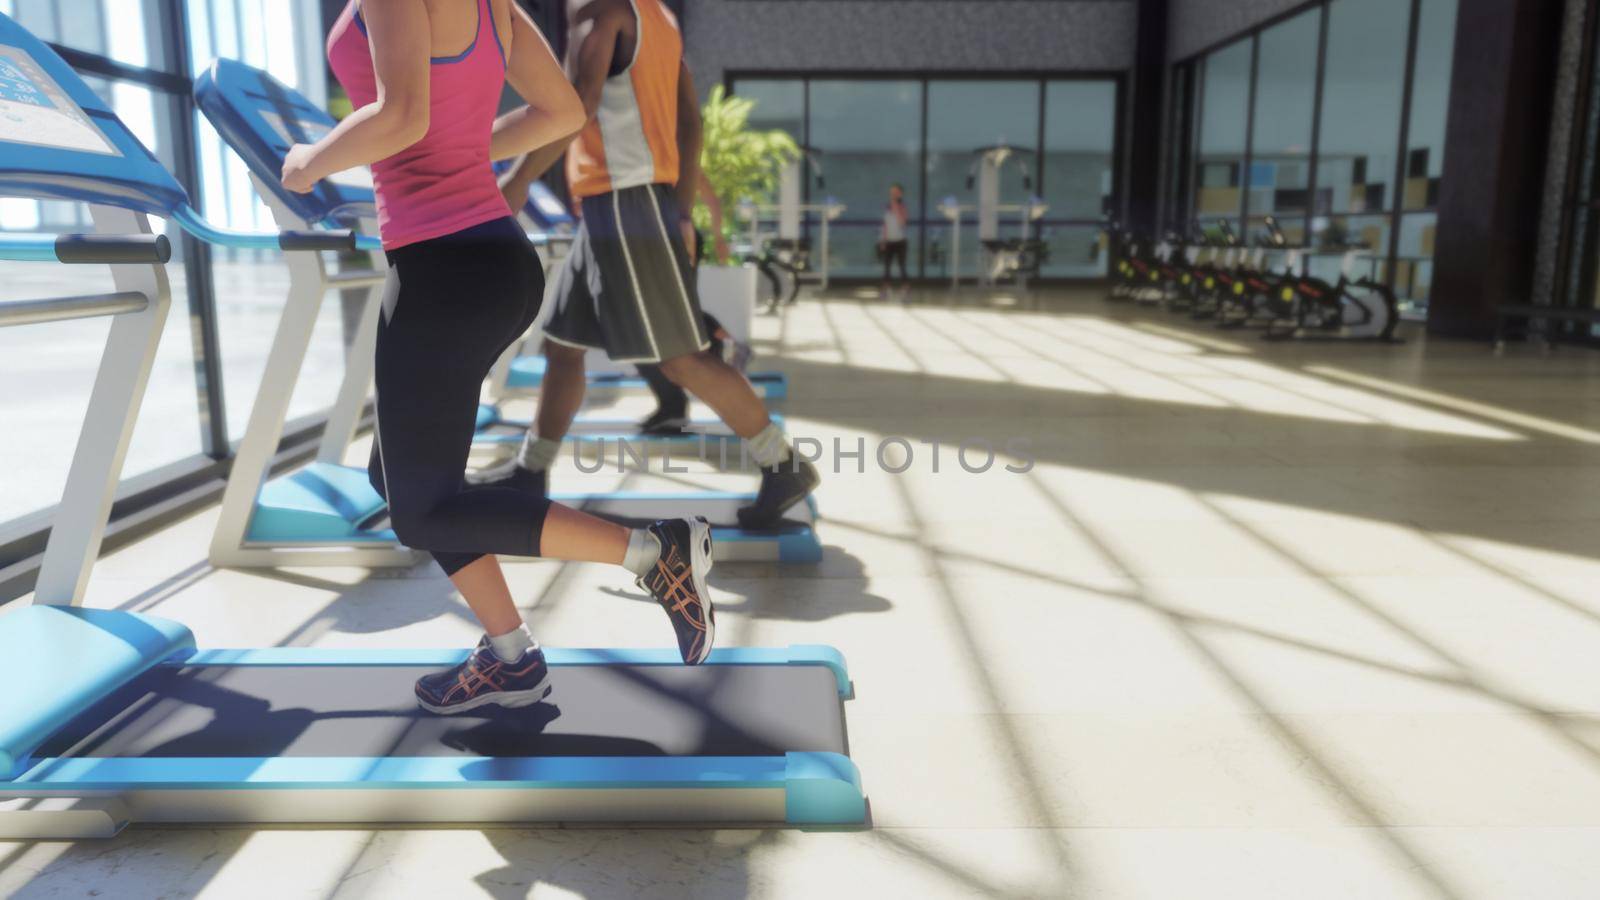 Gym with various exercise machines in it and people walking on treadmill at sunny day. 3D Rendering by designprojects